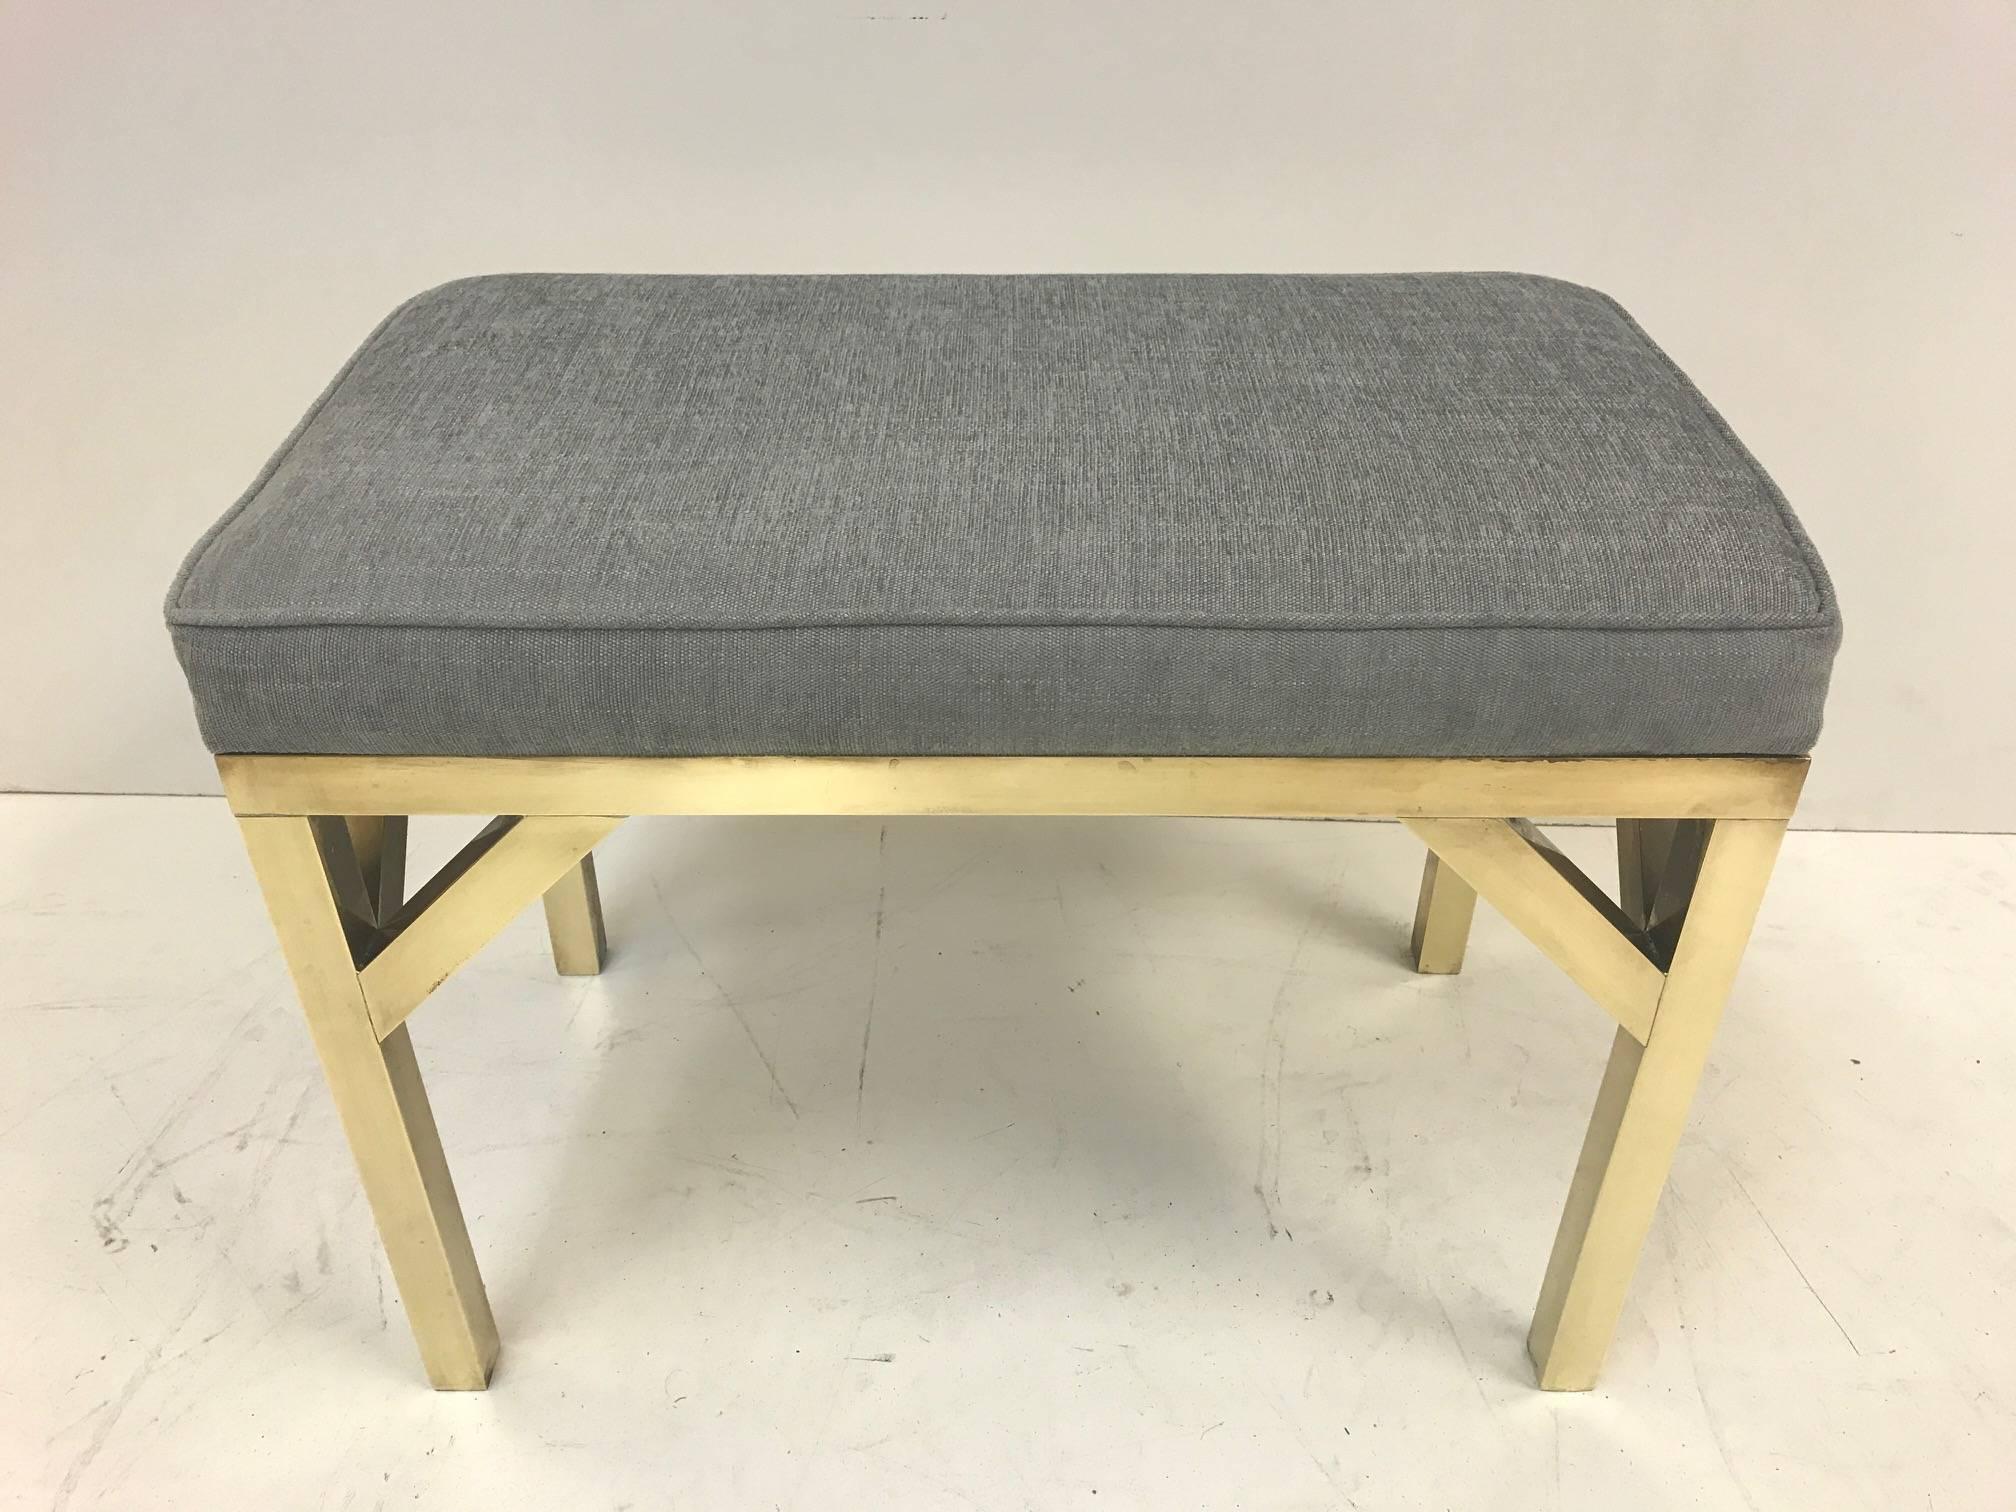 Pair of brass upholstered benches. Newly upholstered in a gray linen-blend fabric. 